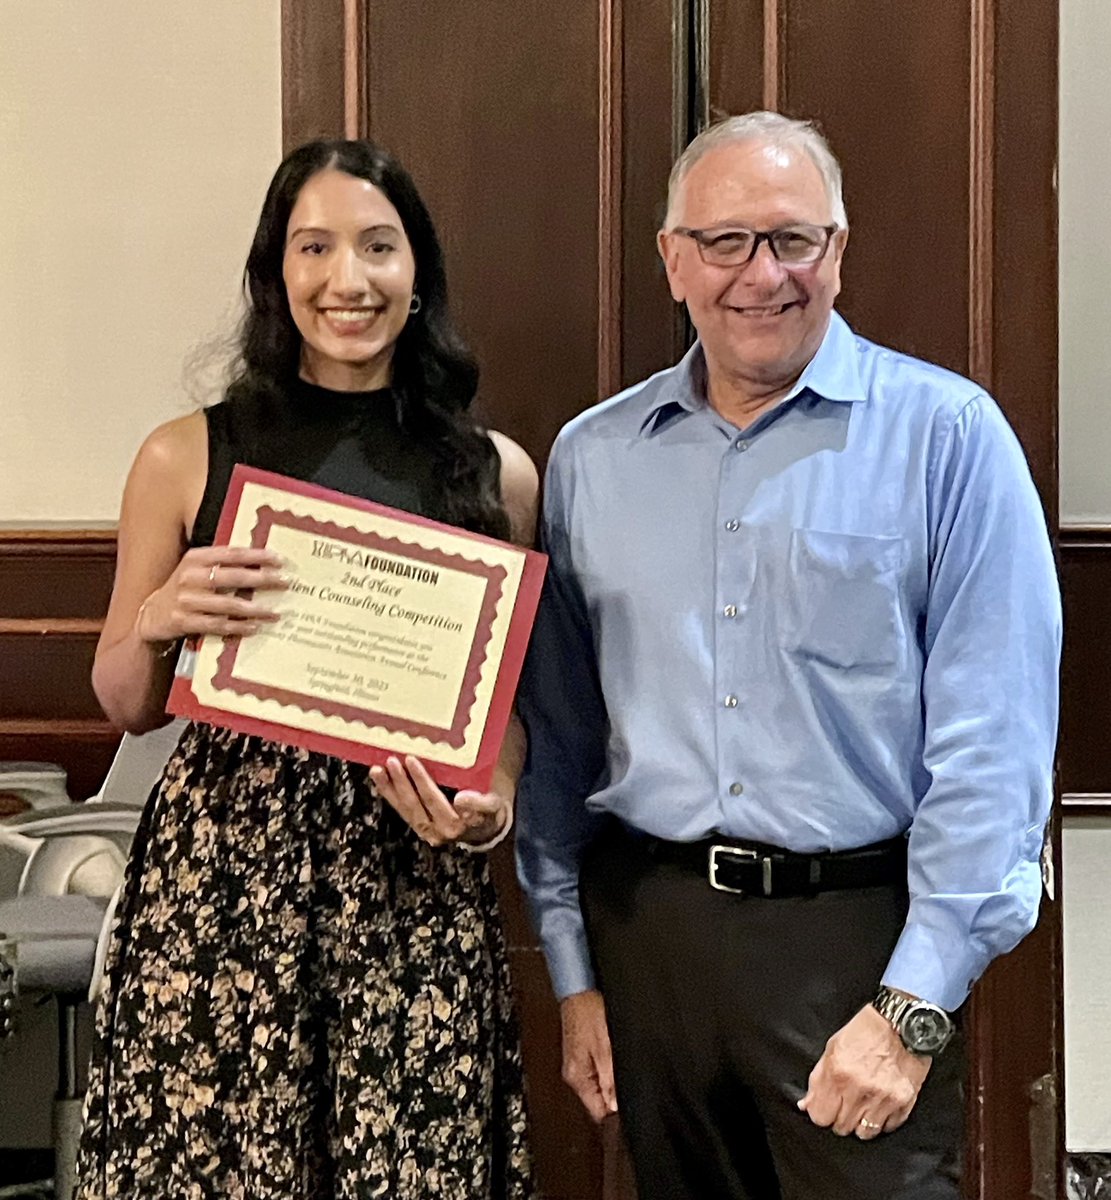 Congrats! to our own P3 student Manisha Sandu on receiving second place in the annual Illinois Pharmacists Association (IPhA) Patient Counseling Competition held in Springfield, IL. Well done, Manisha! We are so proud of you! #mwuproud